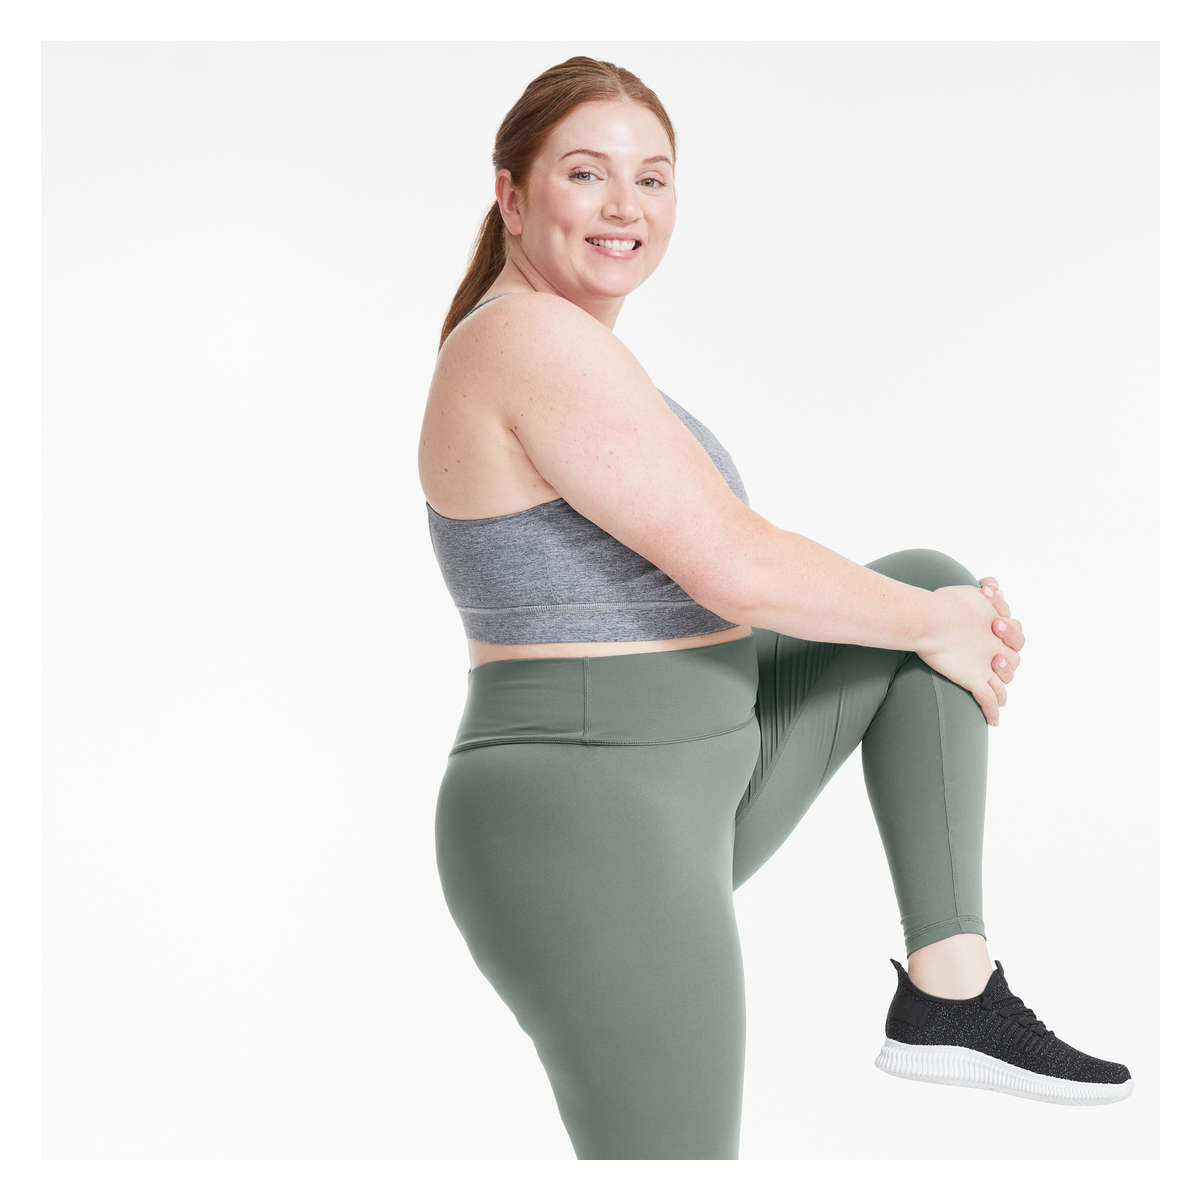 Four-Way Stretch Active Legging in Dark Olive from Joe Fresh